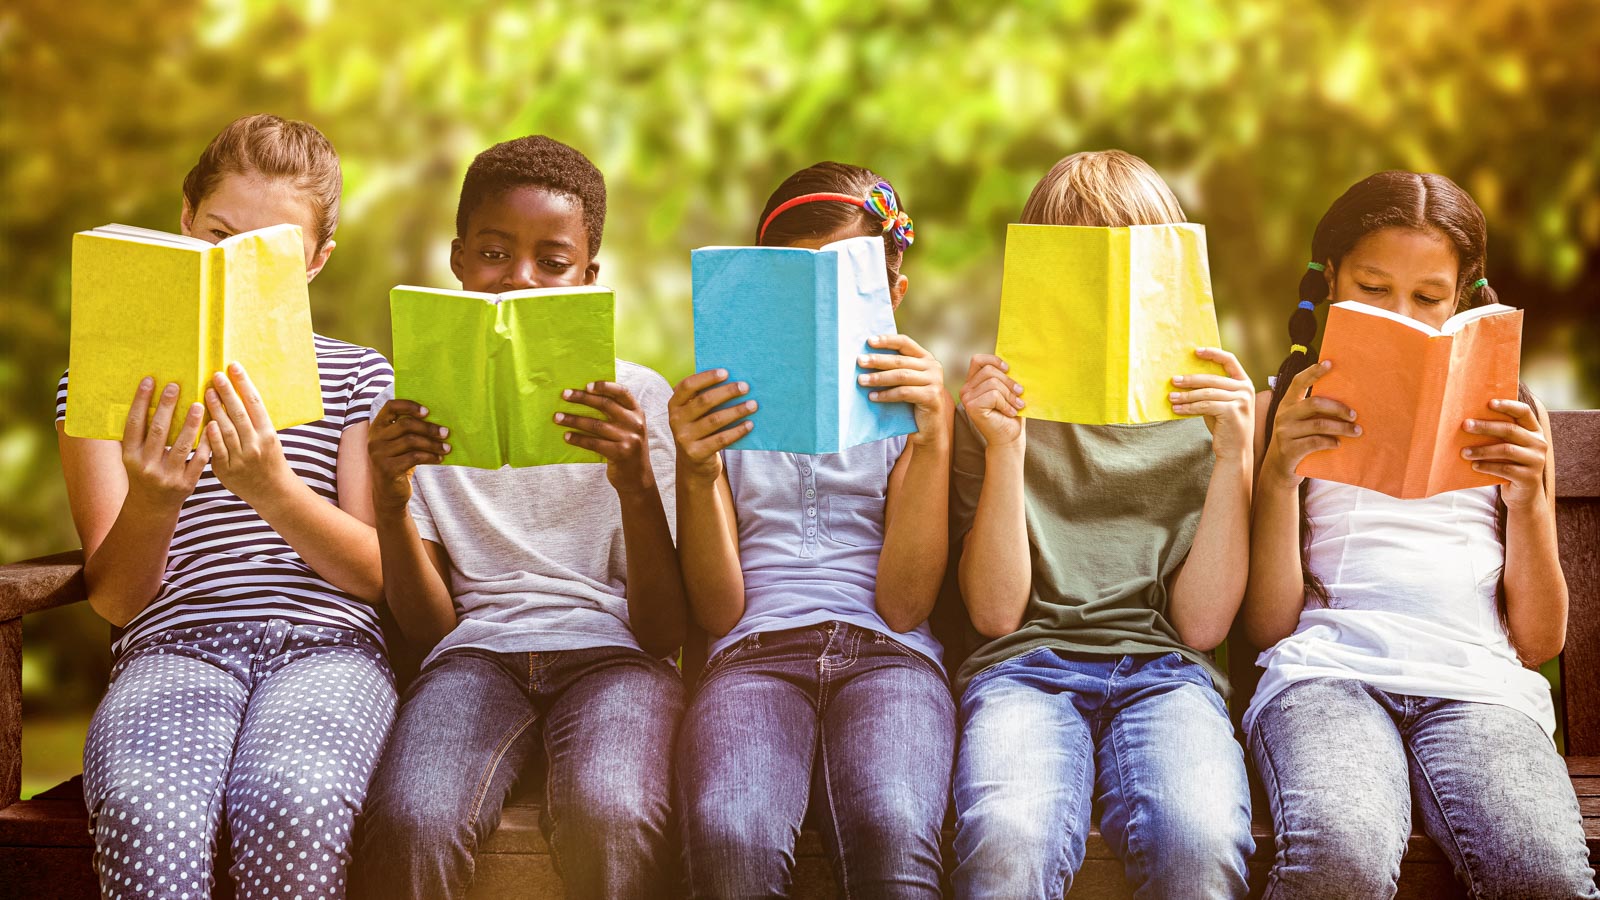 Five children of all races and genders sit outside reading books with colorful covers